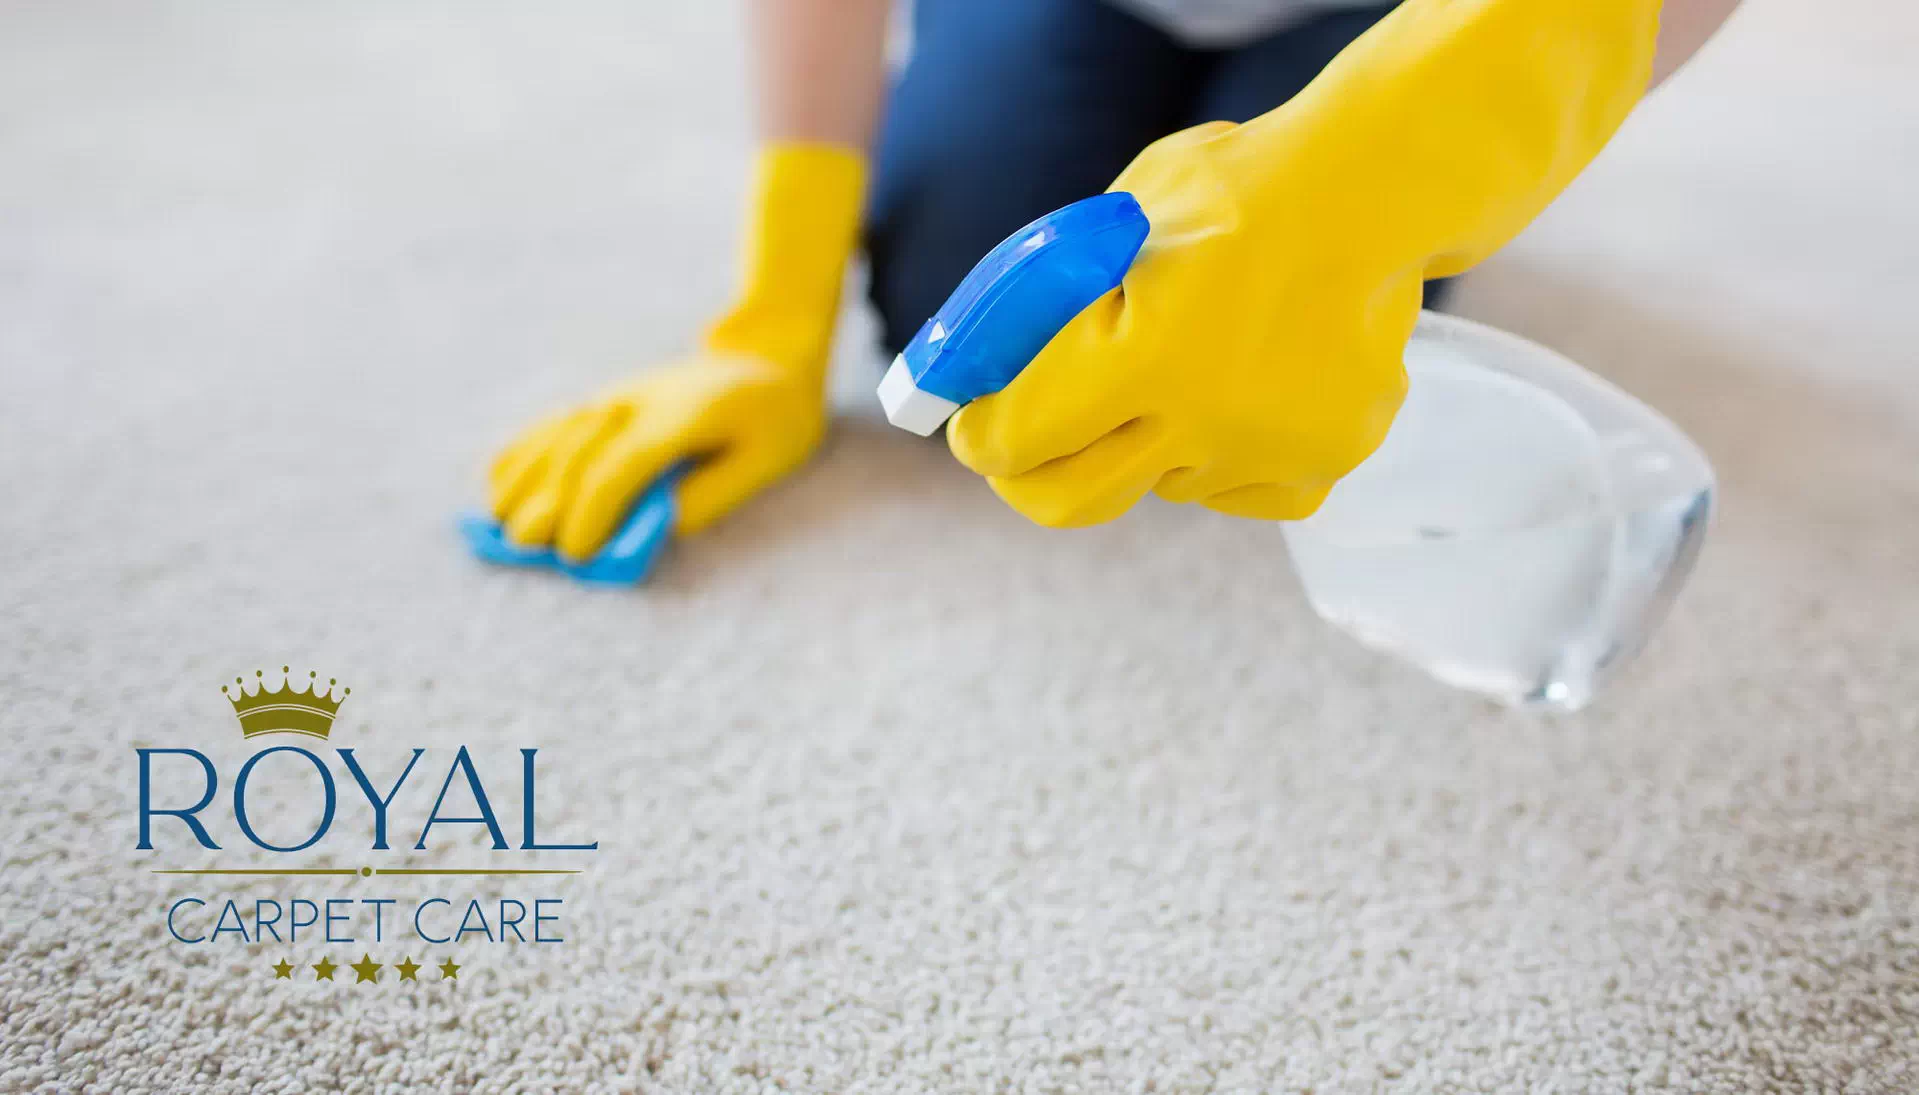 Carpet Cleaning Services In London